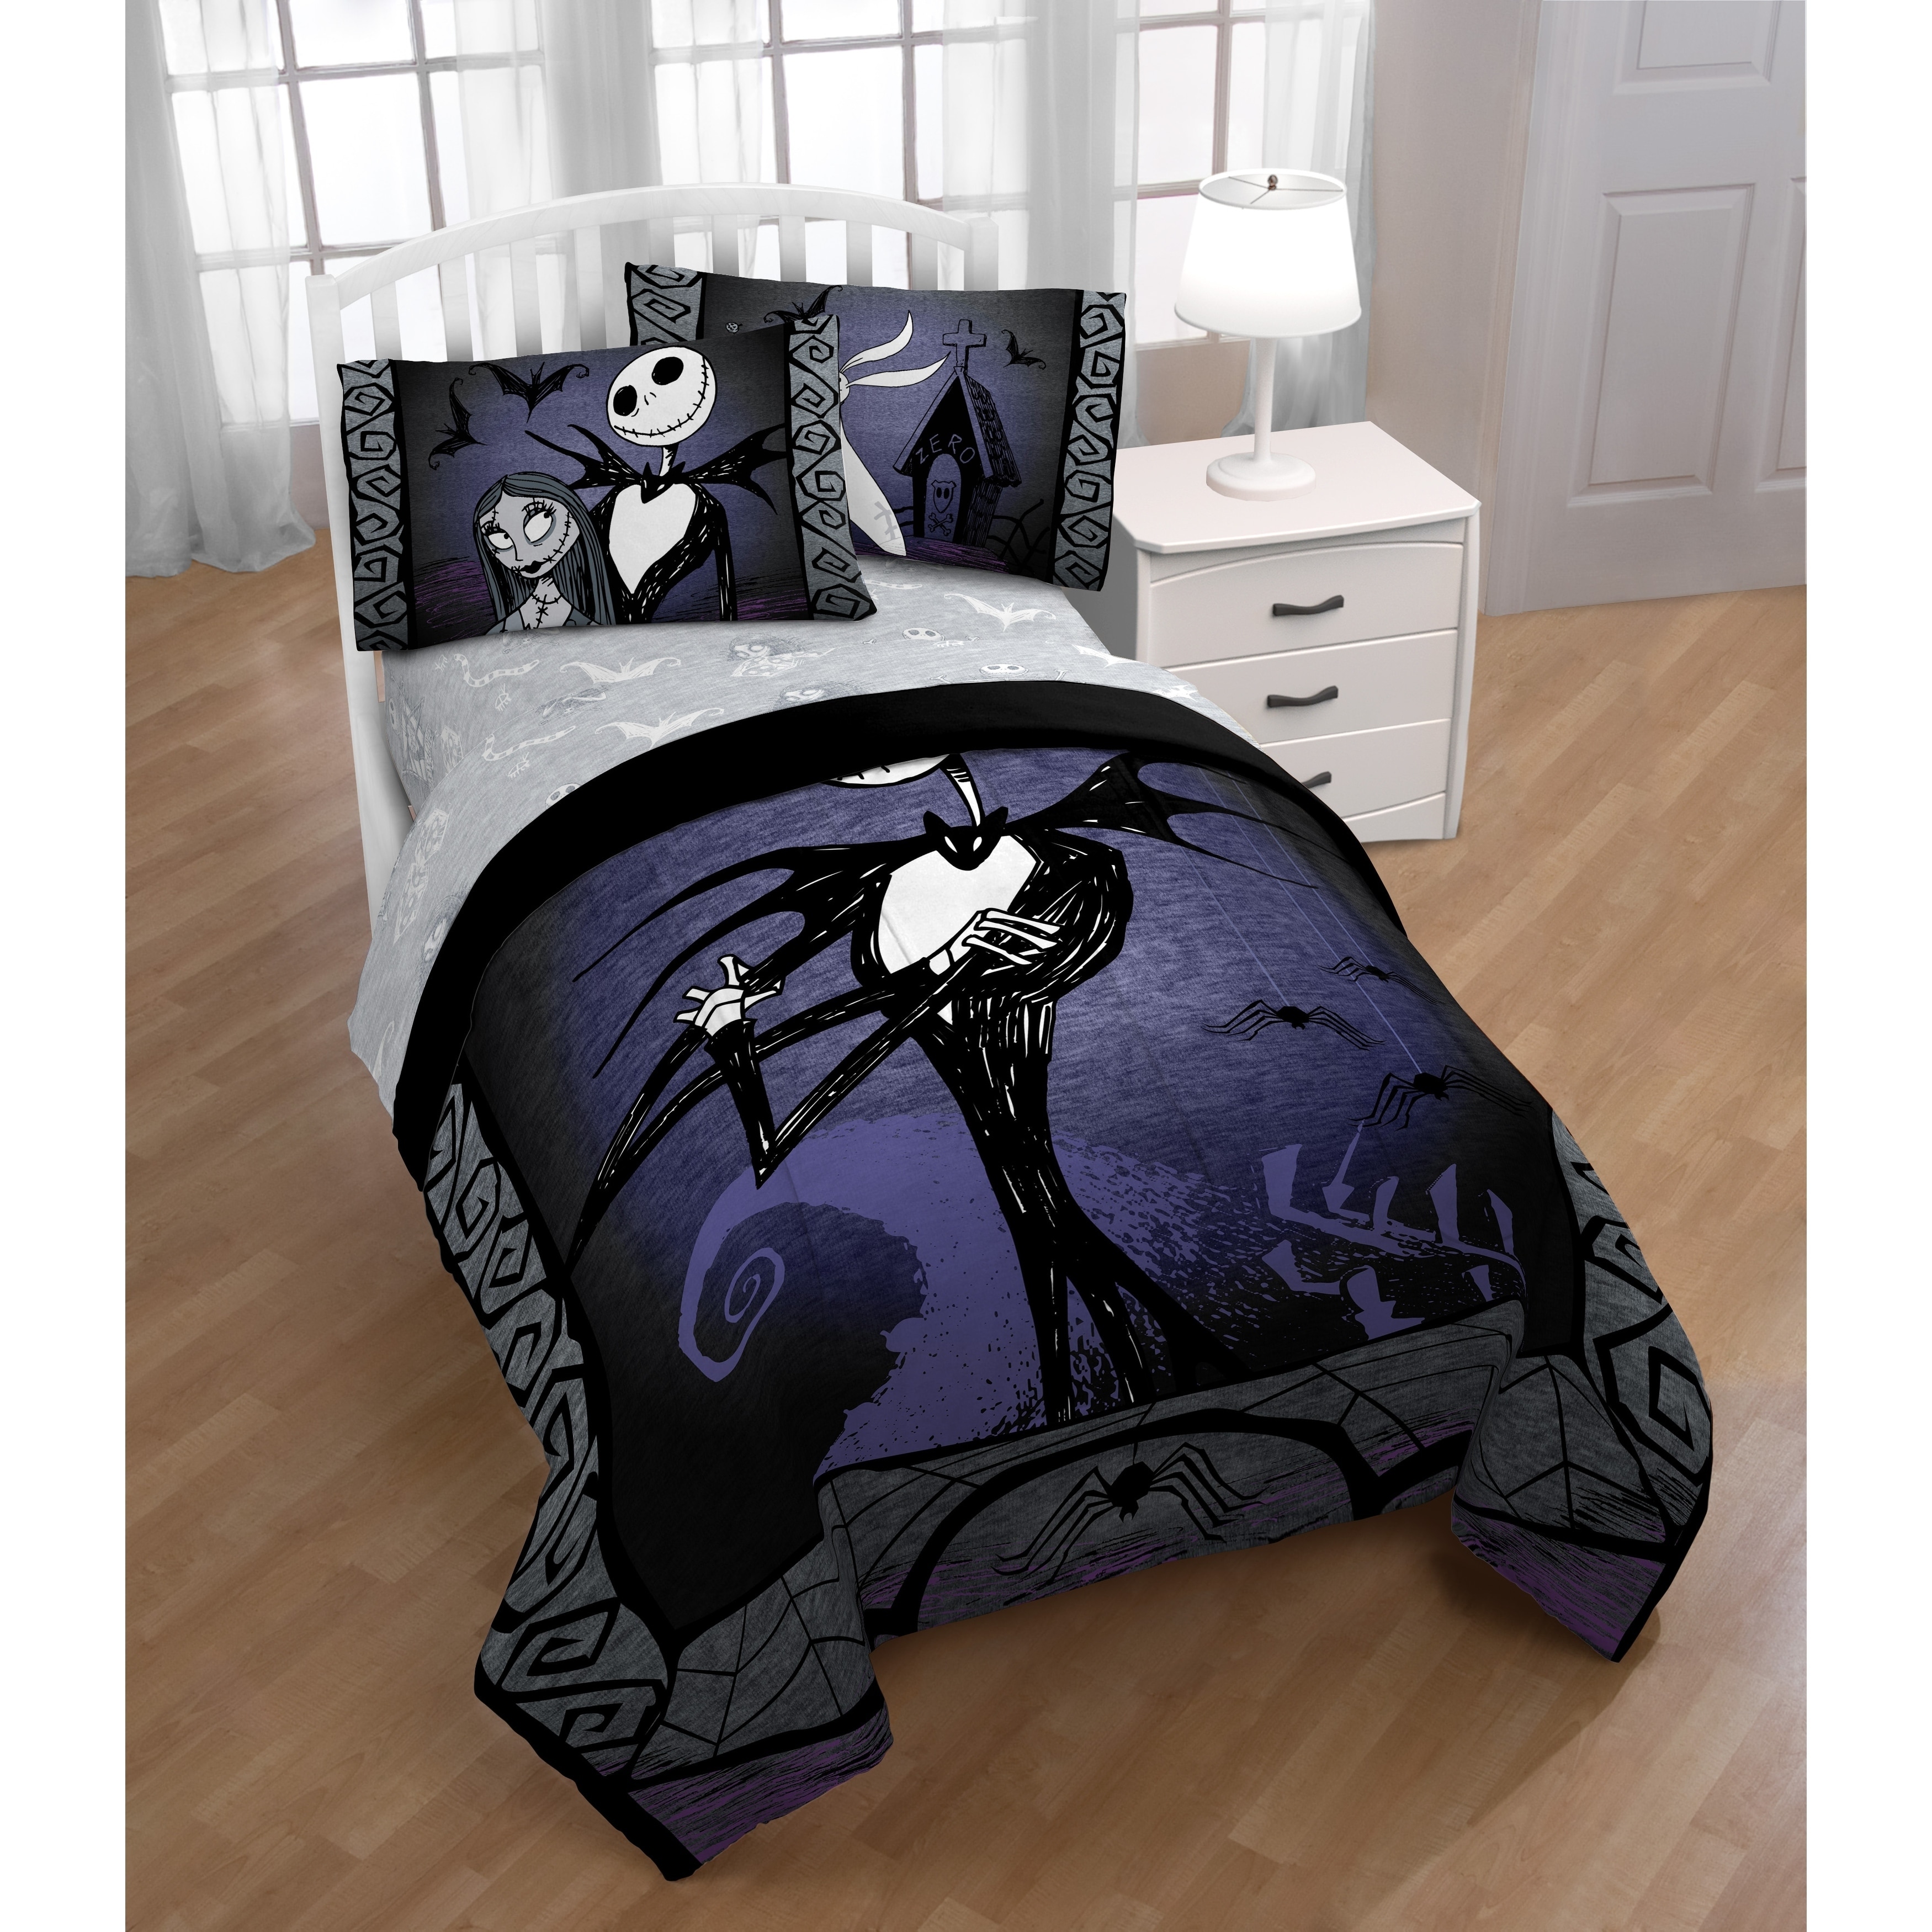 Shop Disney Nightmare Before Christmas Meant To Be Reversible